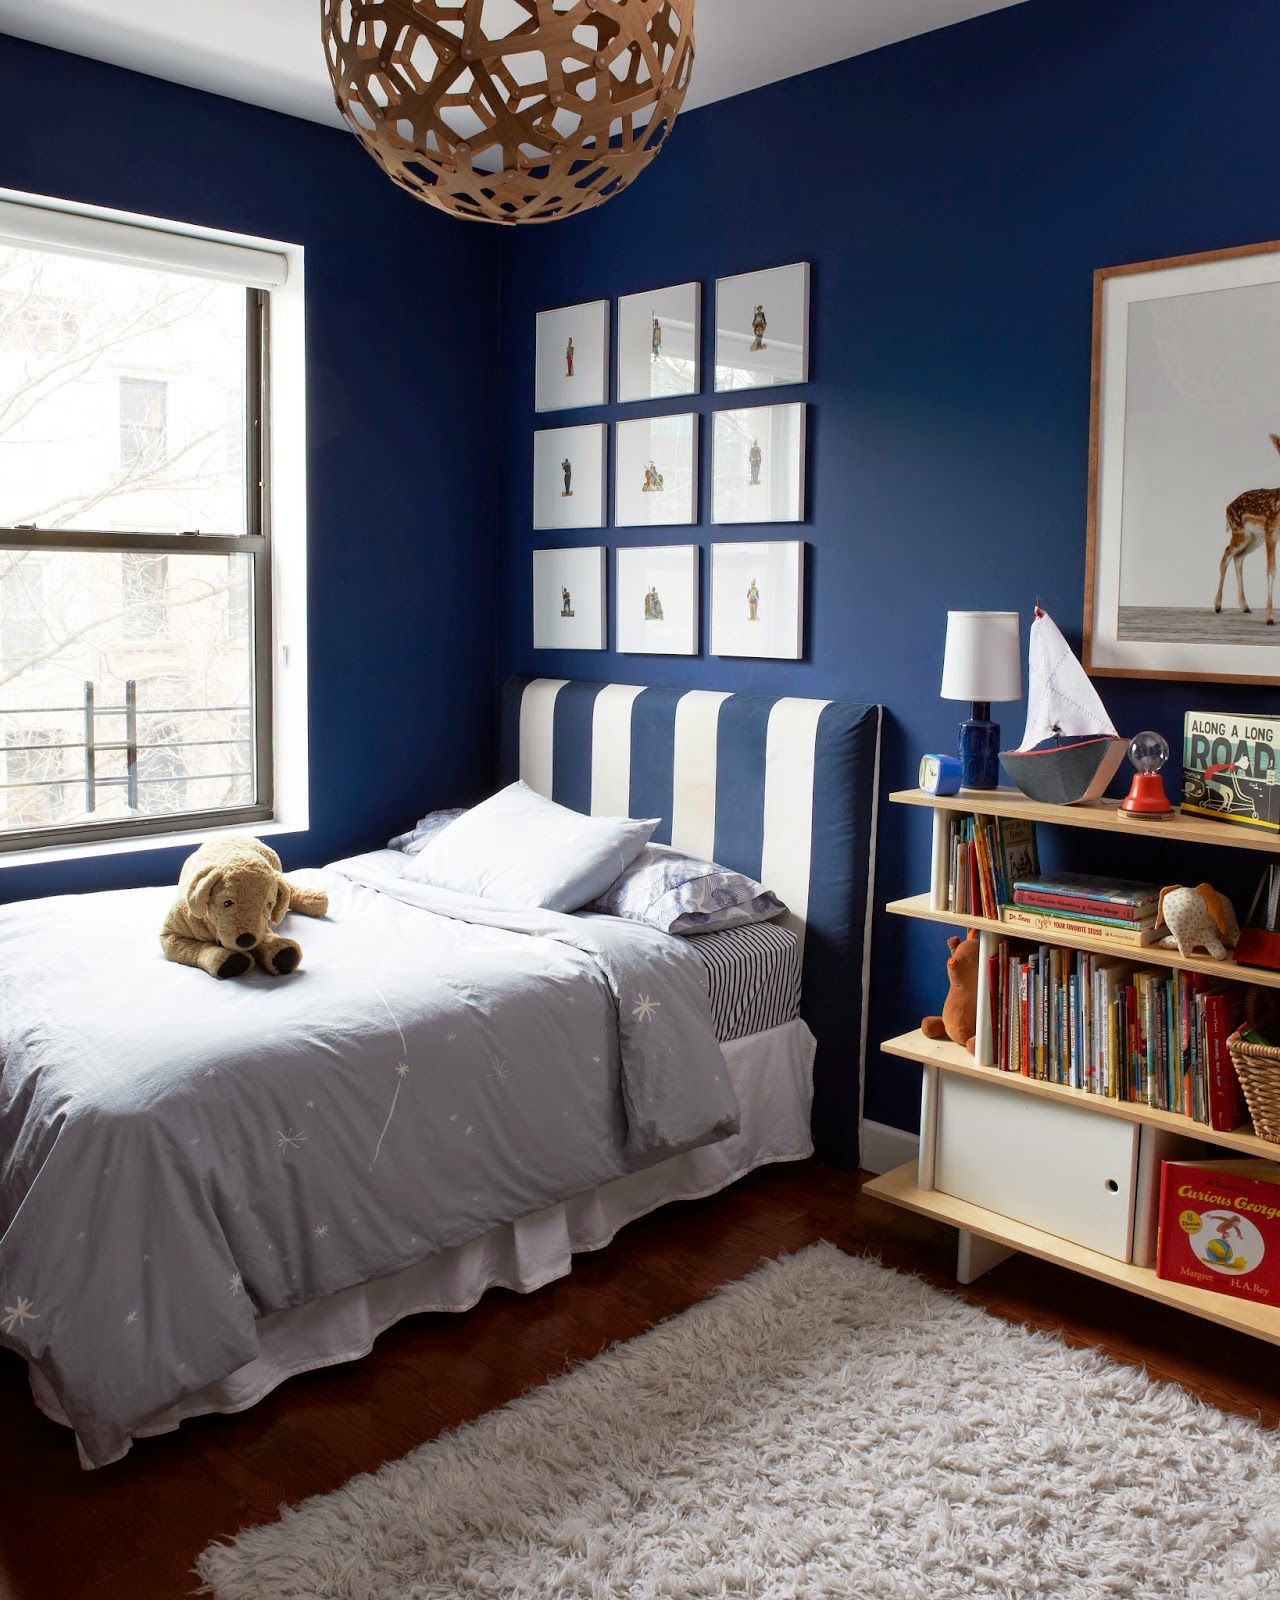 Best Paint For Kids Room
 Help Which Bedroom Paint Color Would You Choose